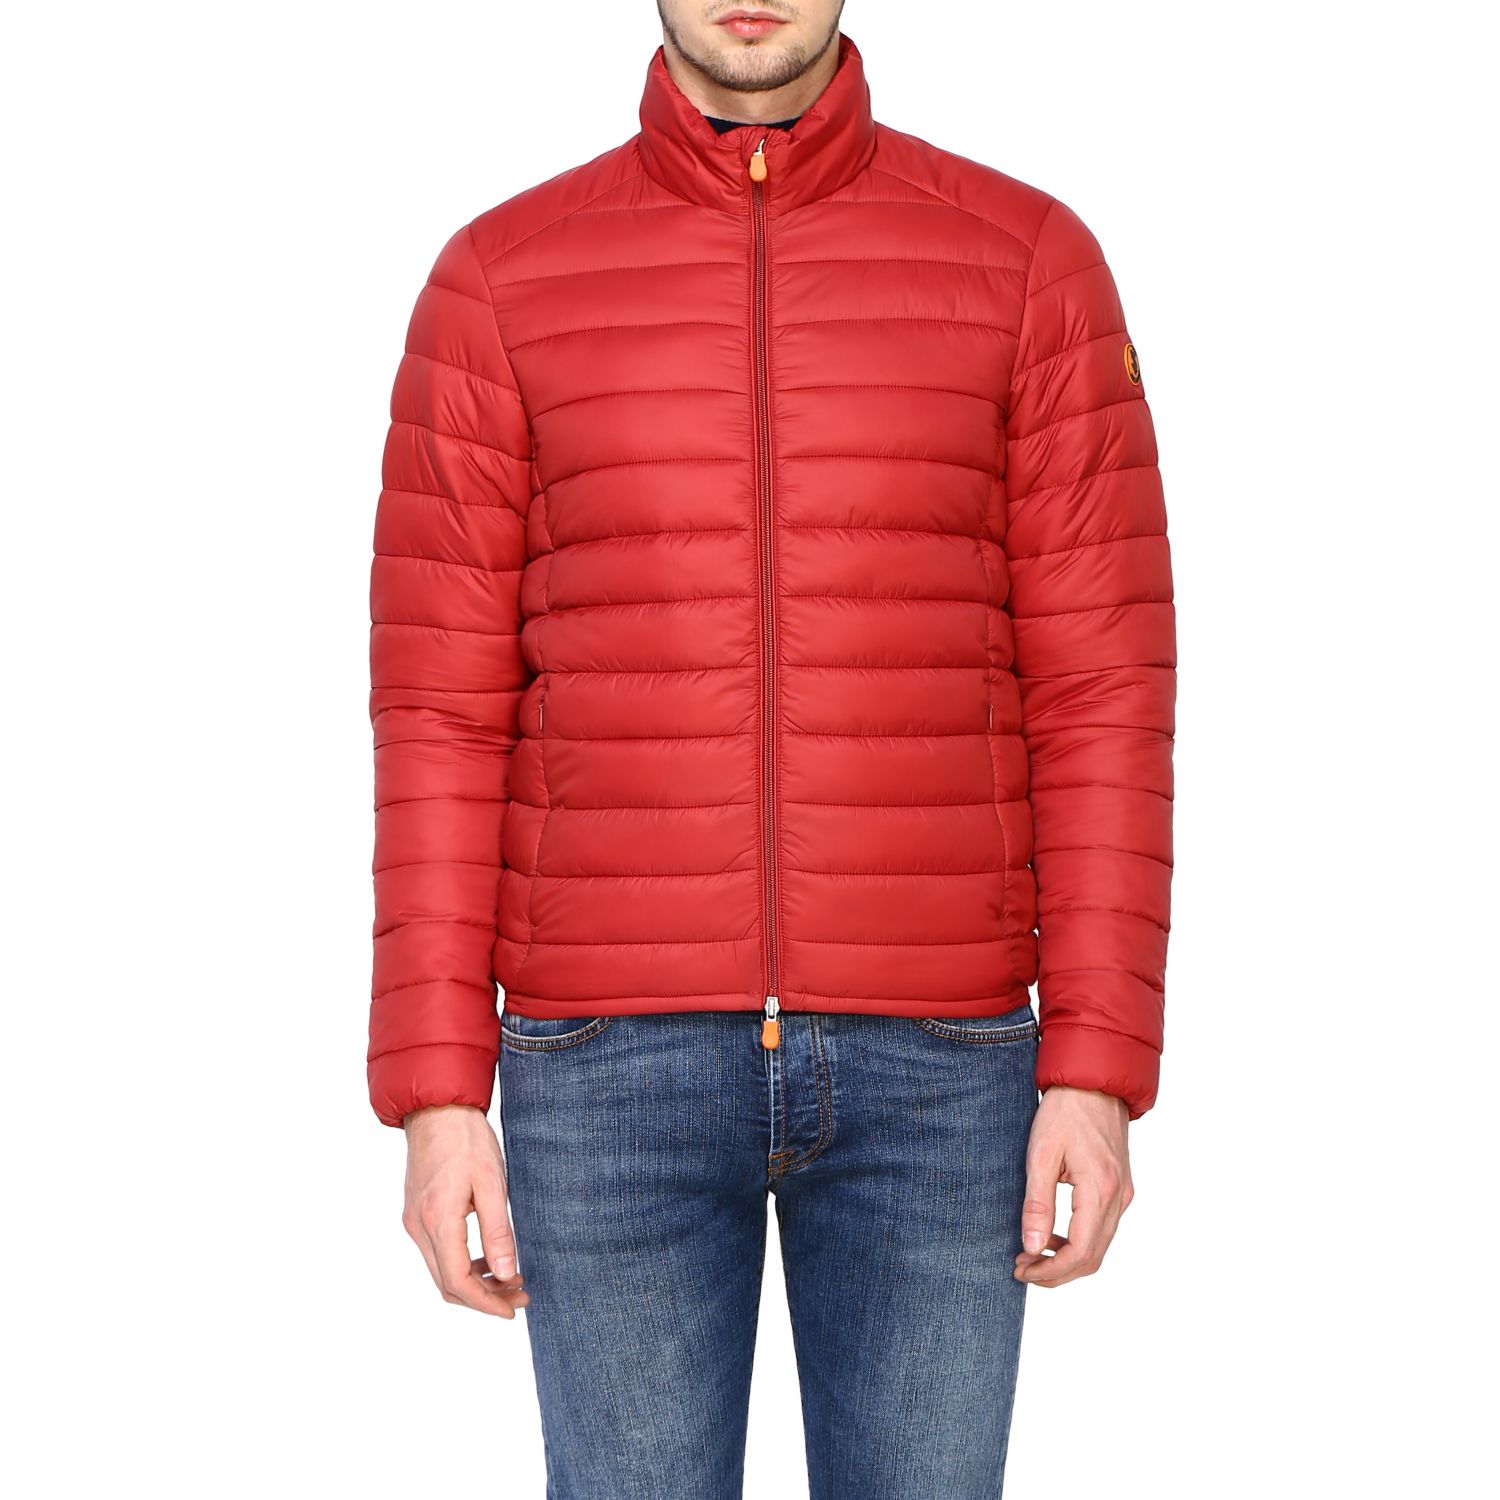 Save The Duck Outlet: Jacket men | Jacket Save The Duck Men Red ...